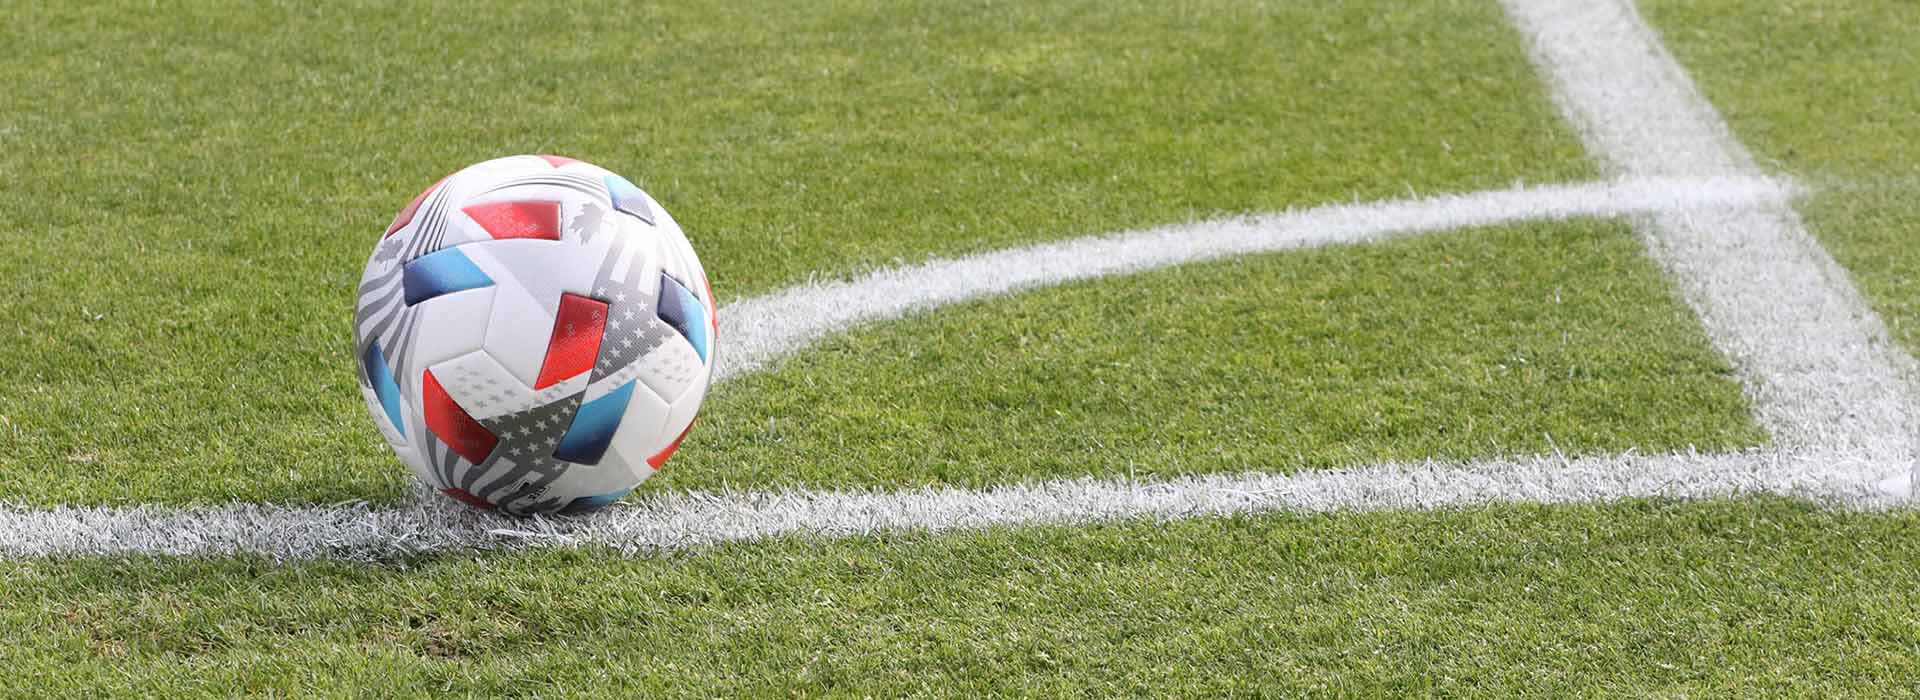 Tennessee Tech pauses soccer activities due to COVID-19 protocols